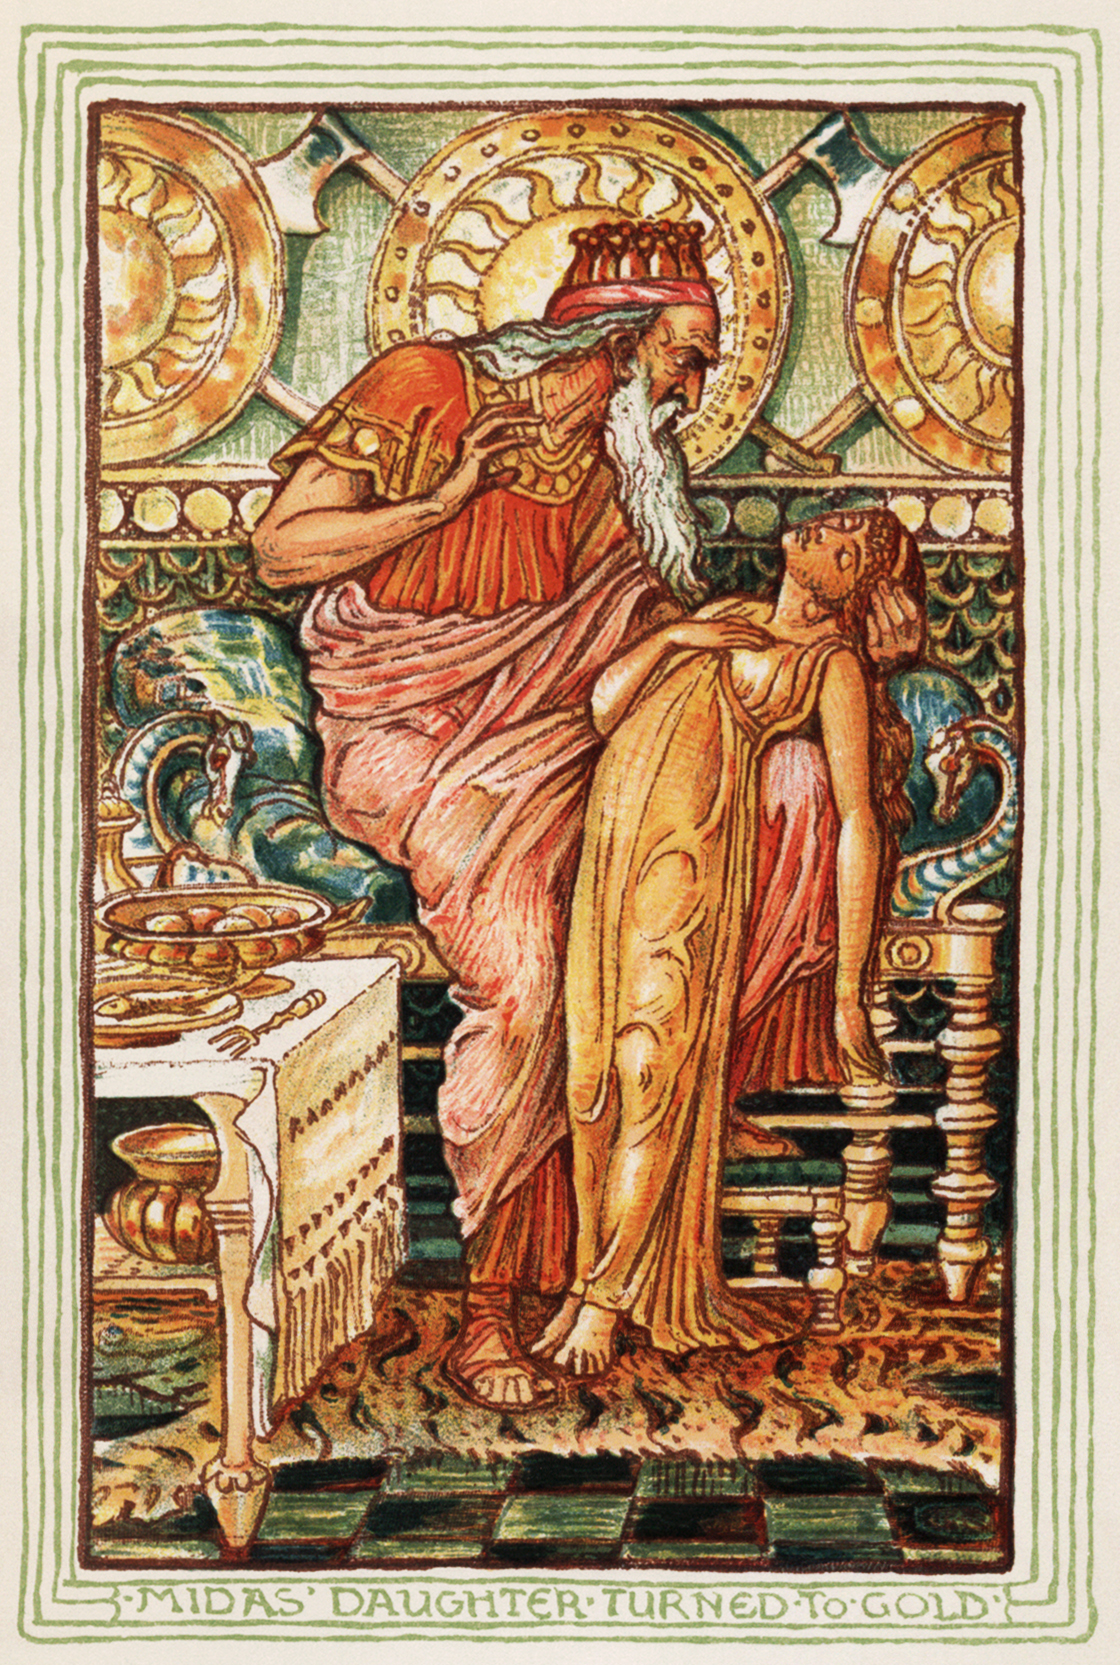 A bold bright illustration with warm tones and gold throughout. The painting depicts an aristocrat holding a small girl in his arms.